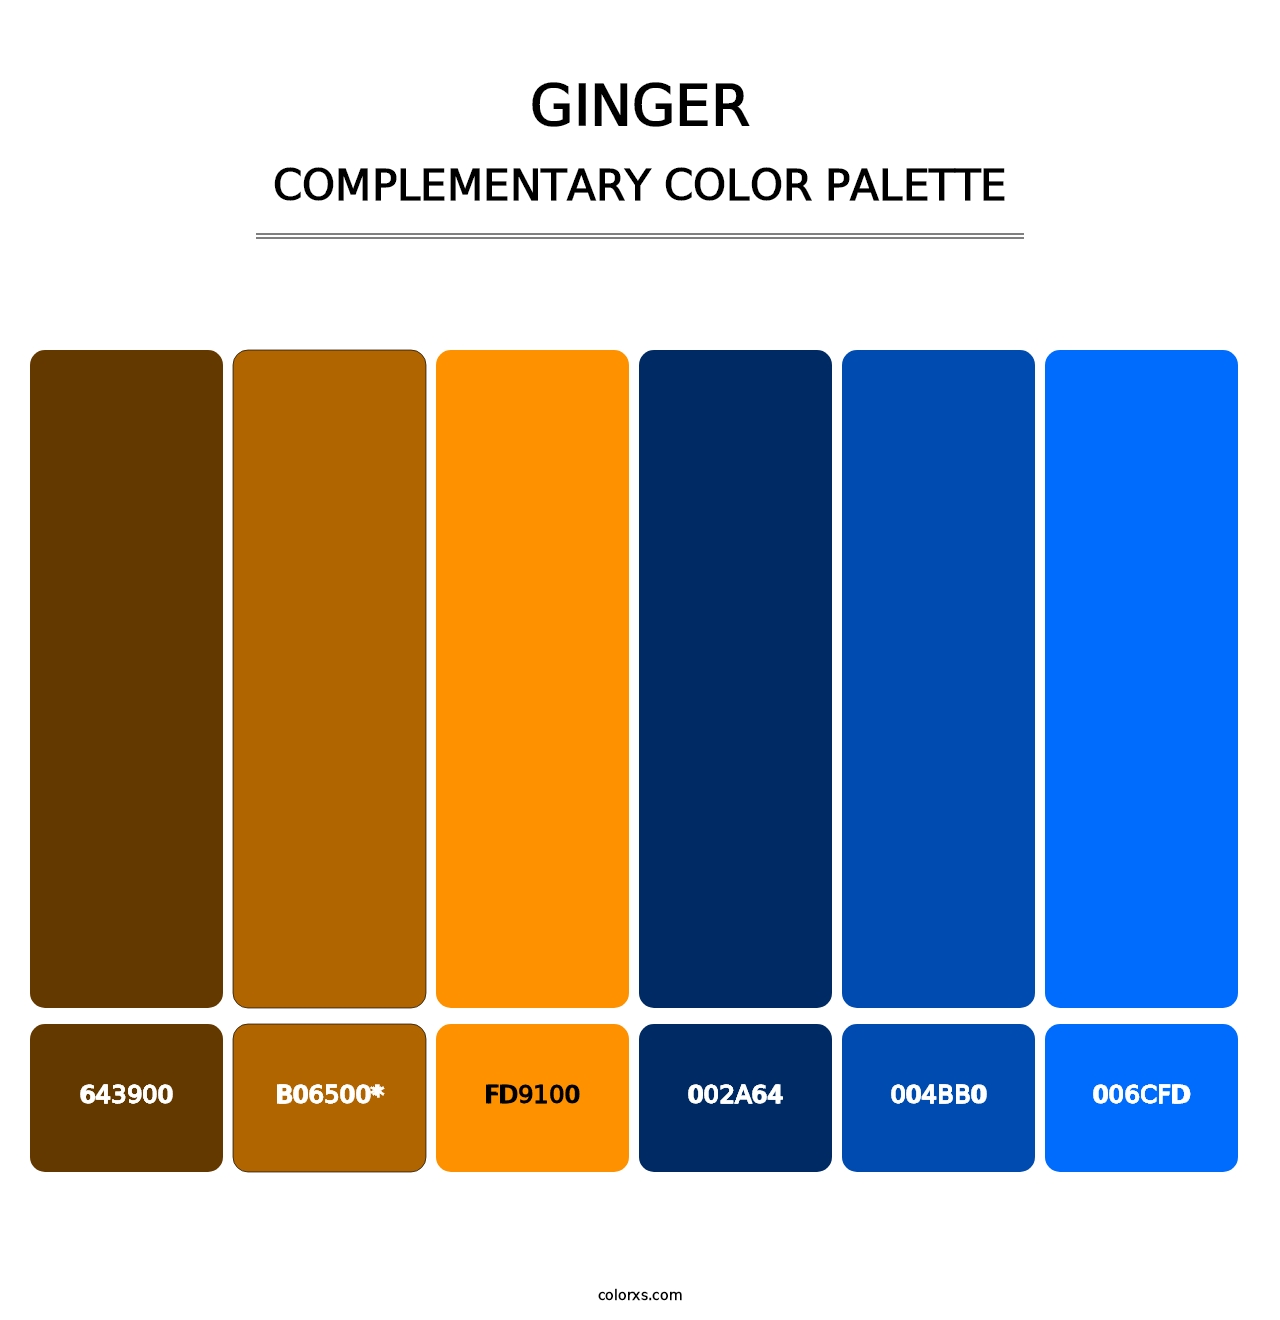 Ginger - Complementary Color Palette